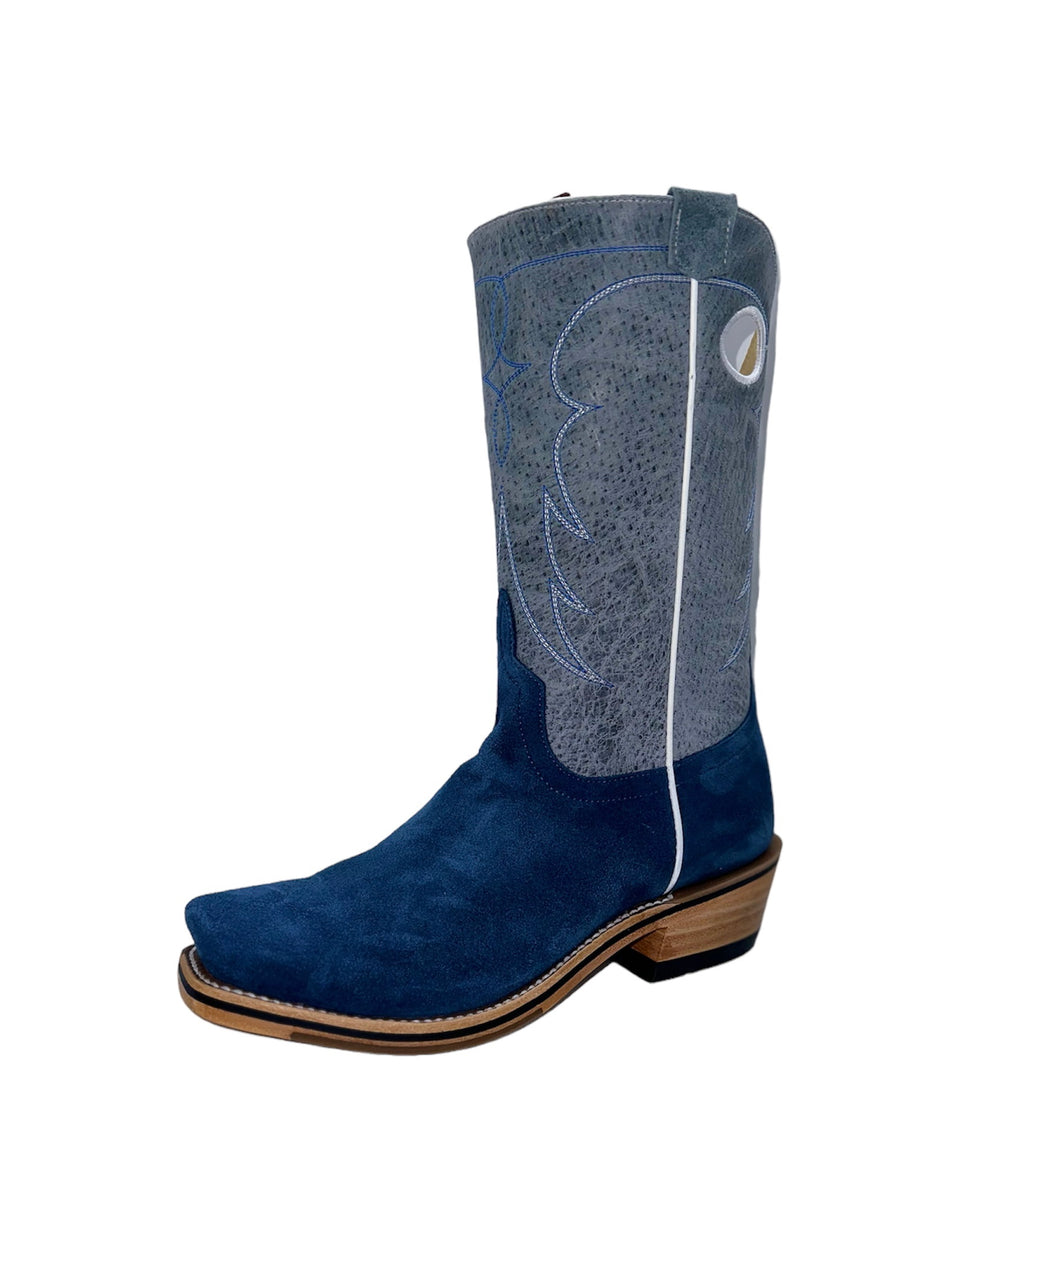 Horsepower Men's High Noon Blue Sueded Boots